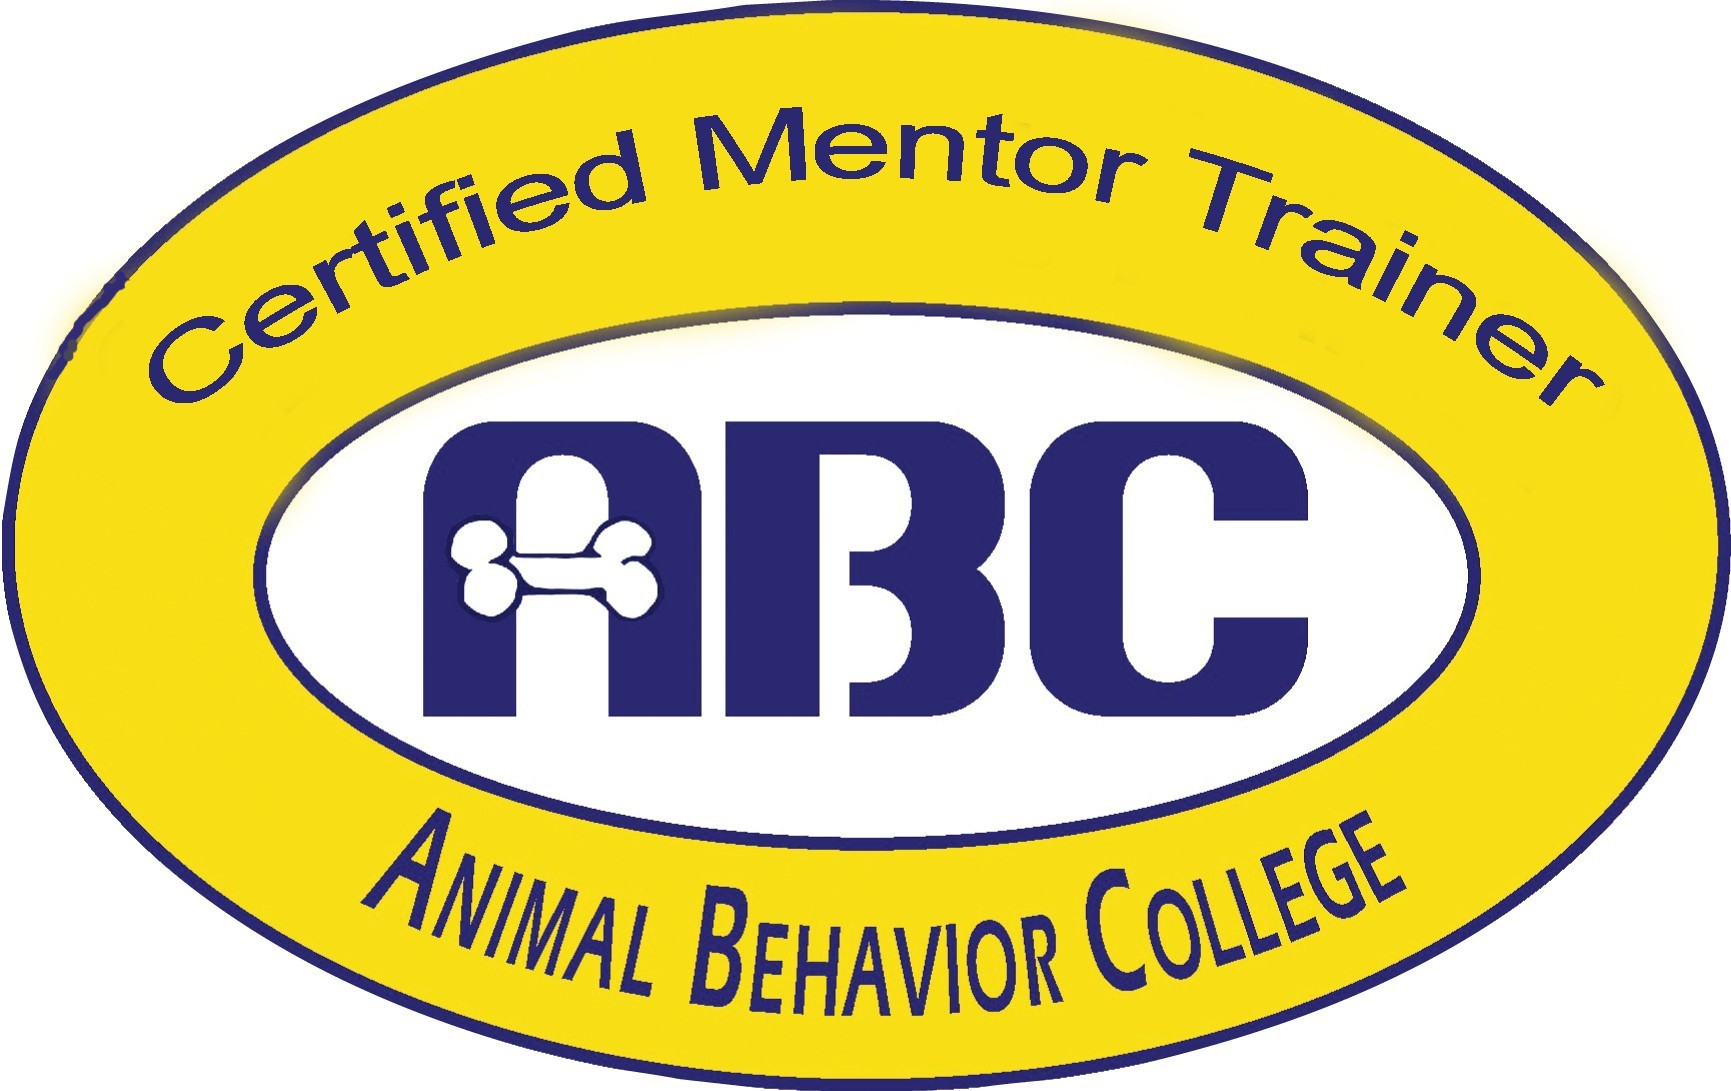 Certified Mentor Trainer for ABC